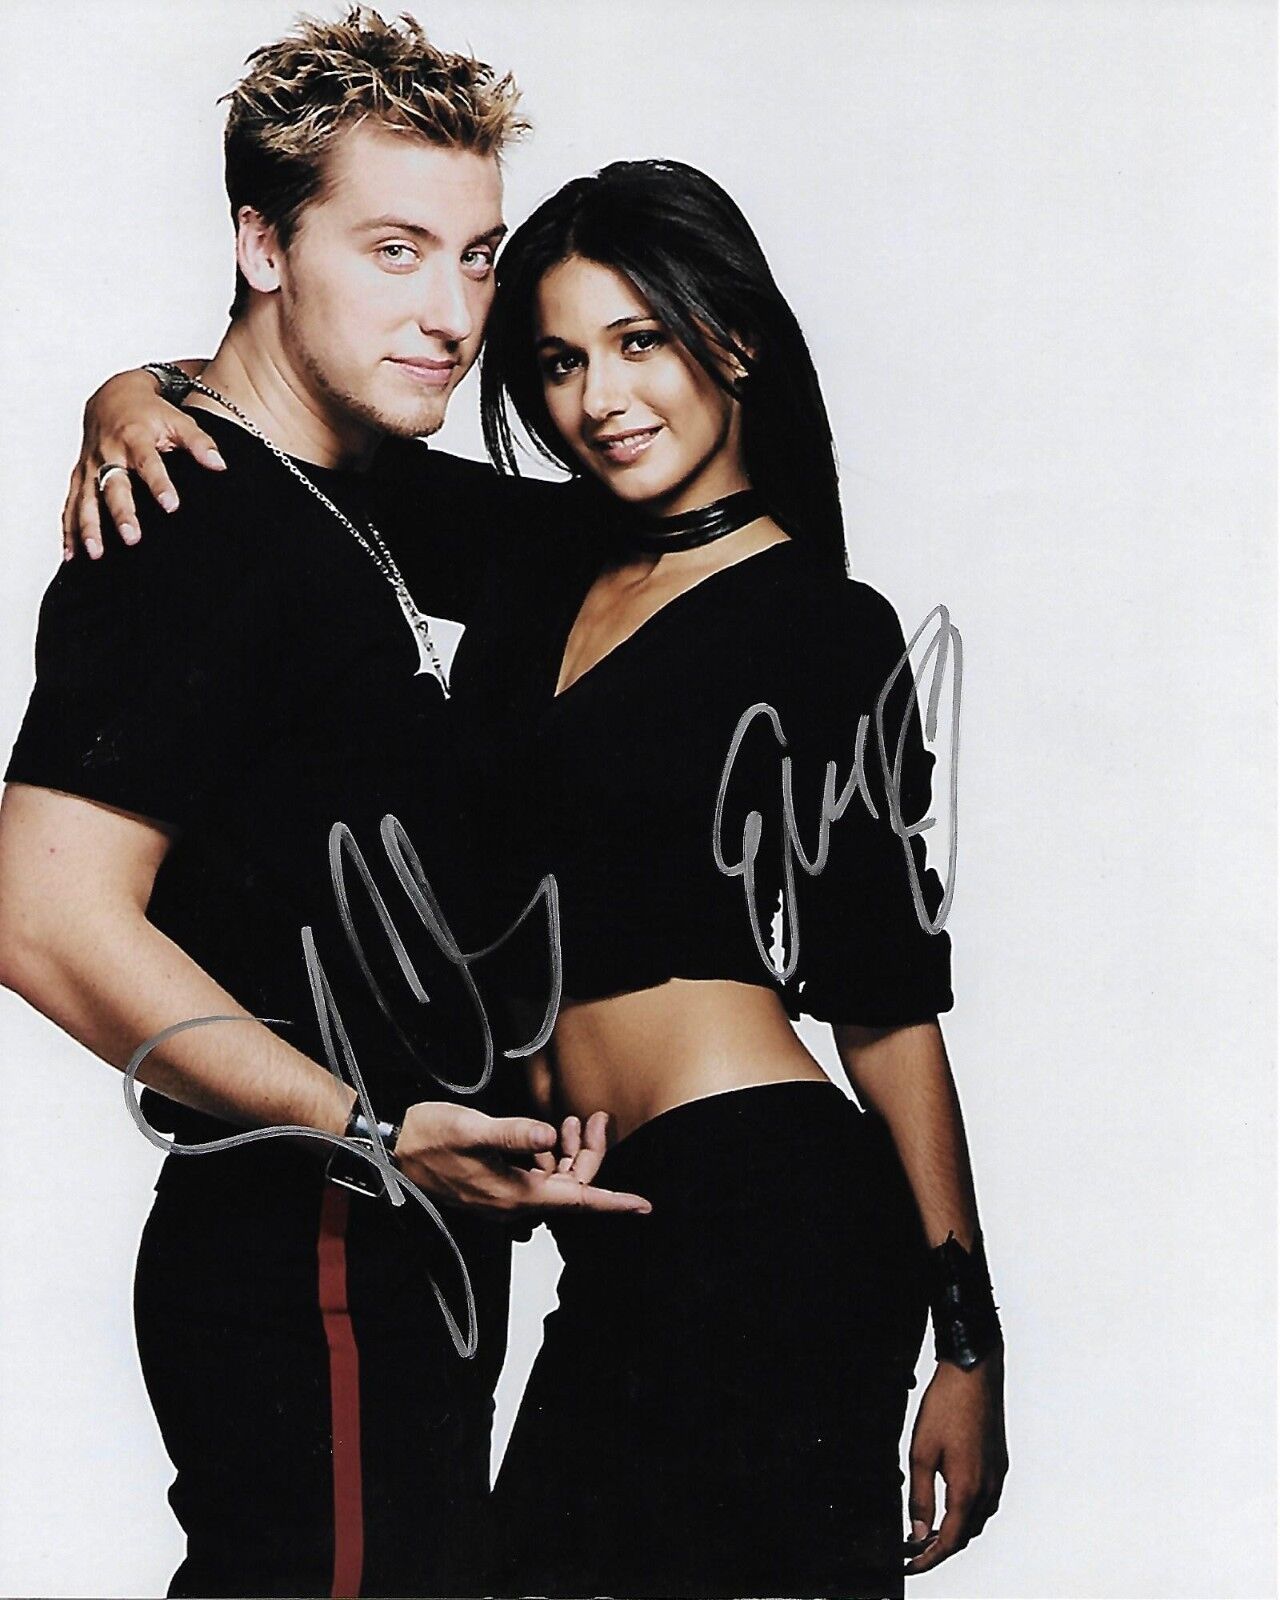 ON THE LINE AUTOGRAPHED Photo Poster painting SIGNED 8X10 #10 EMMANUELLE CHRIQUI LANCE BASS